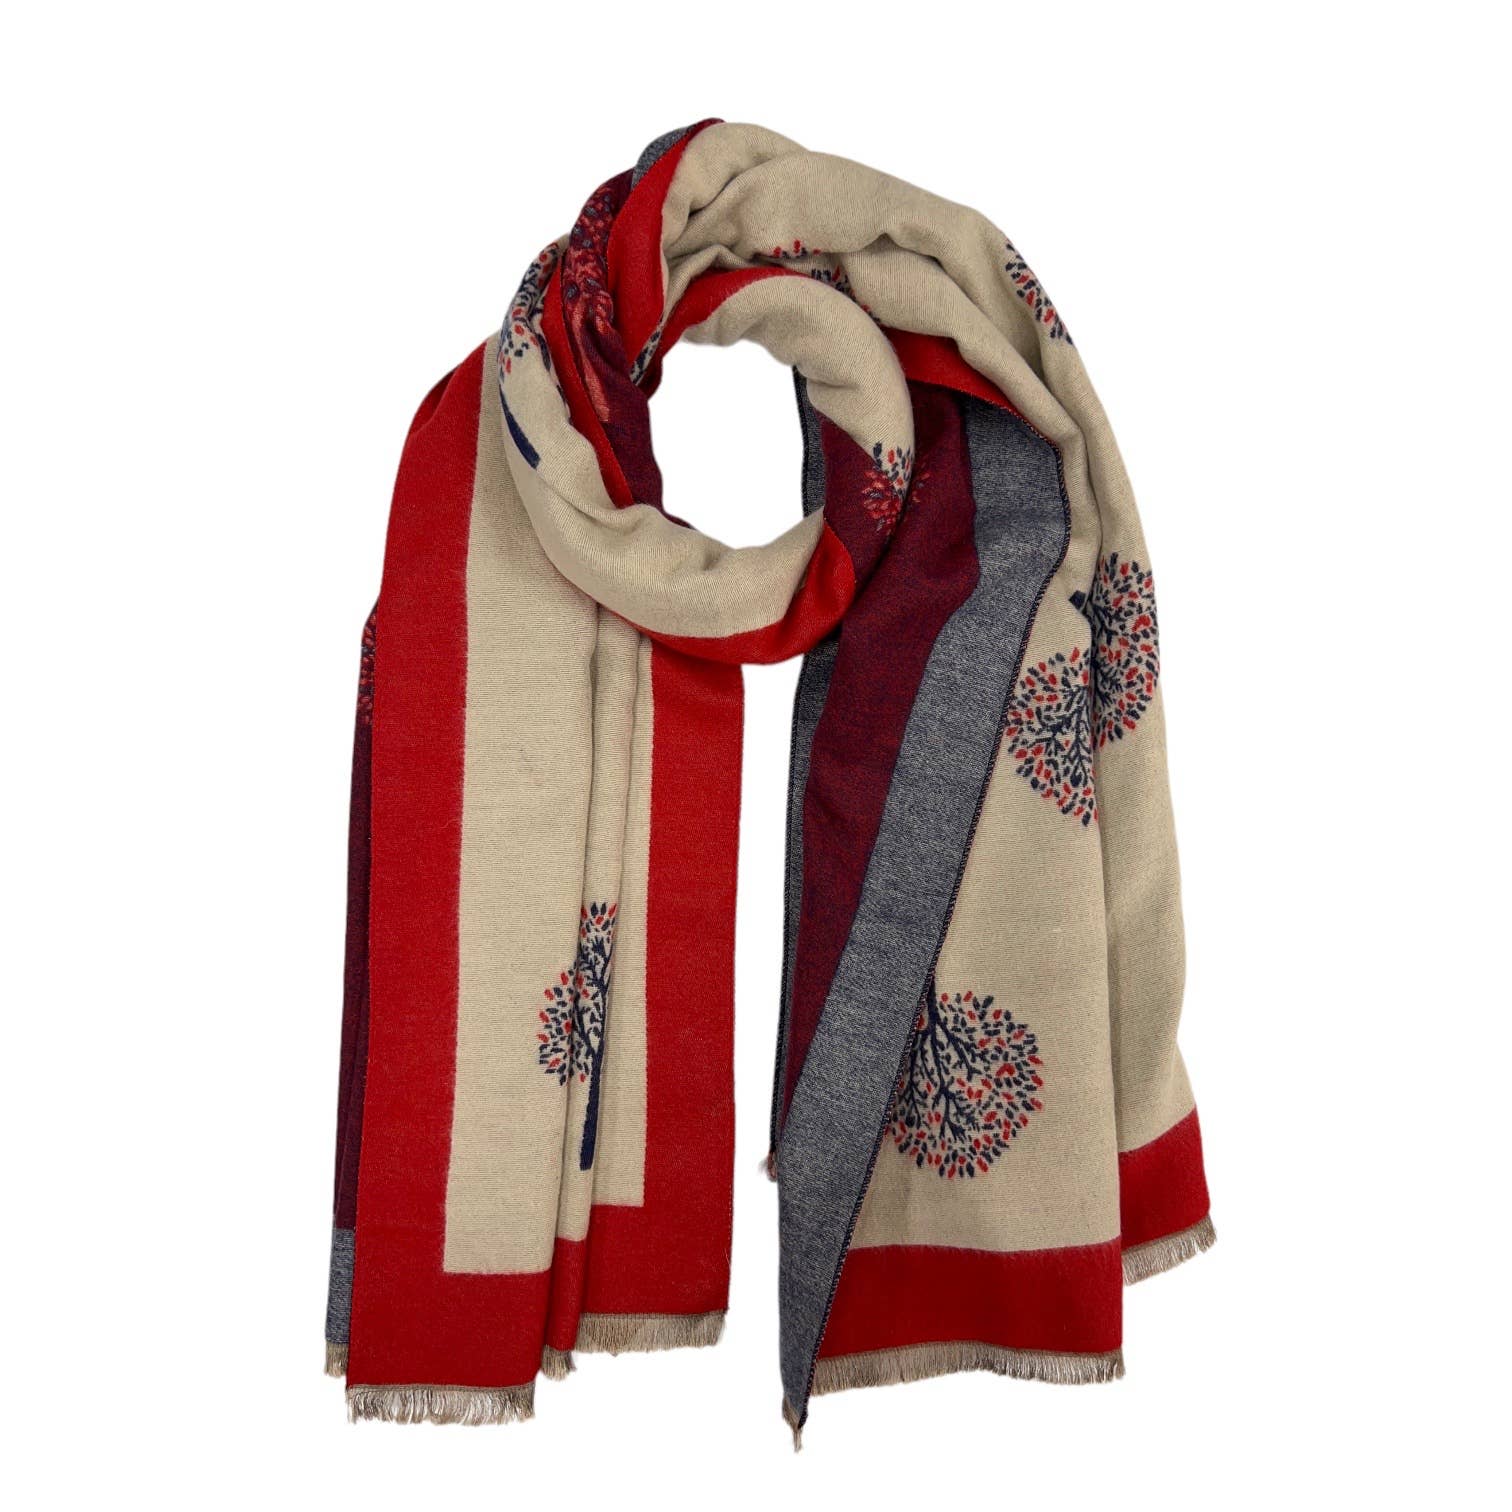 Scarf, Reversible Tree Print Cashmere Blend, Red/Cream